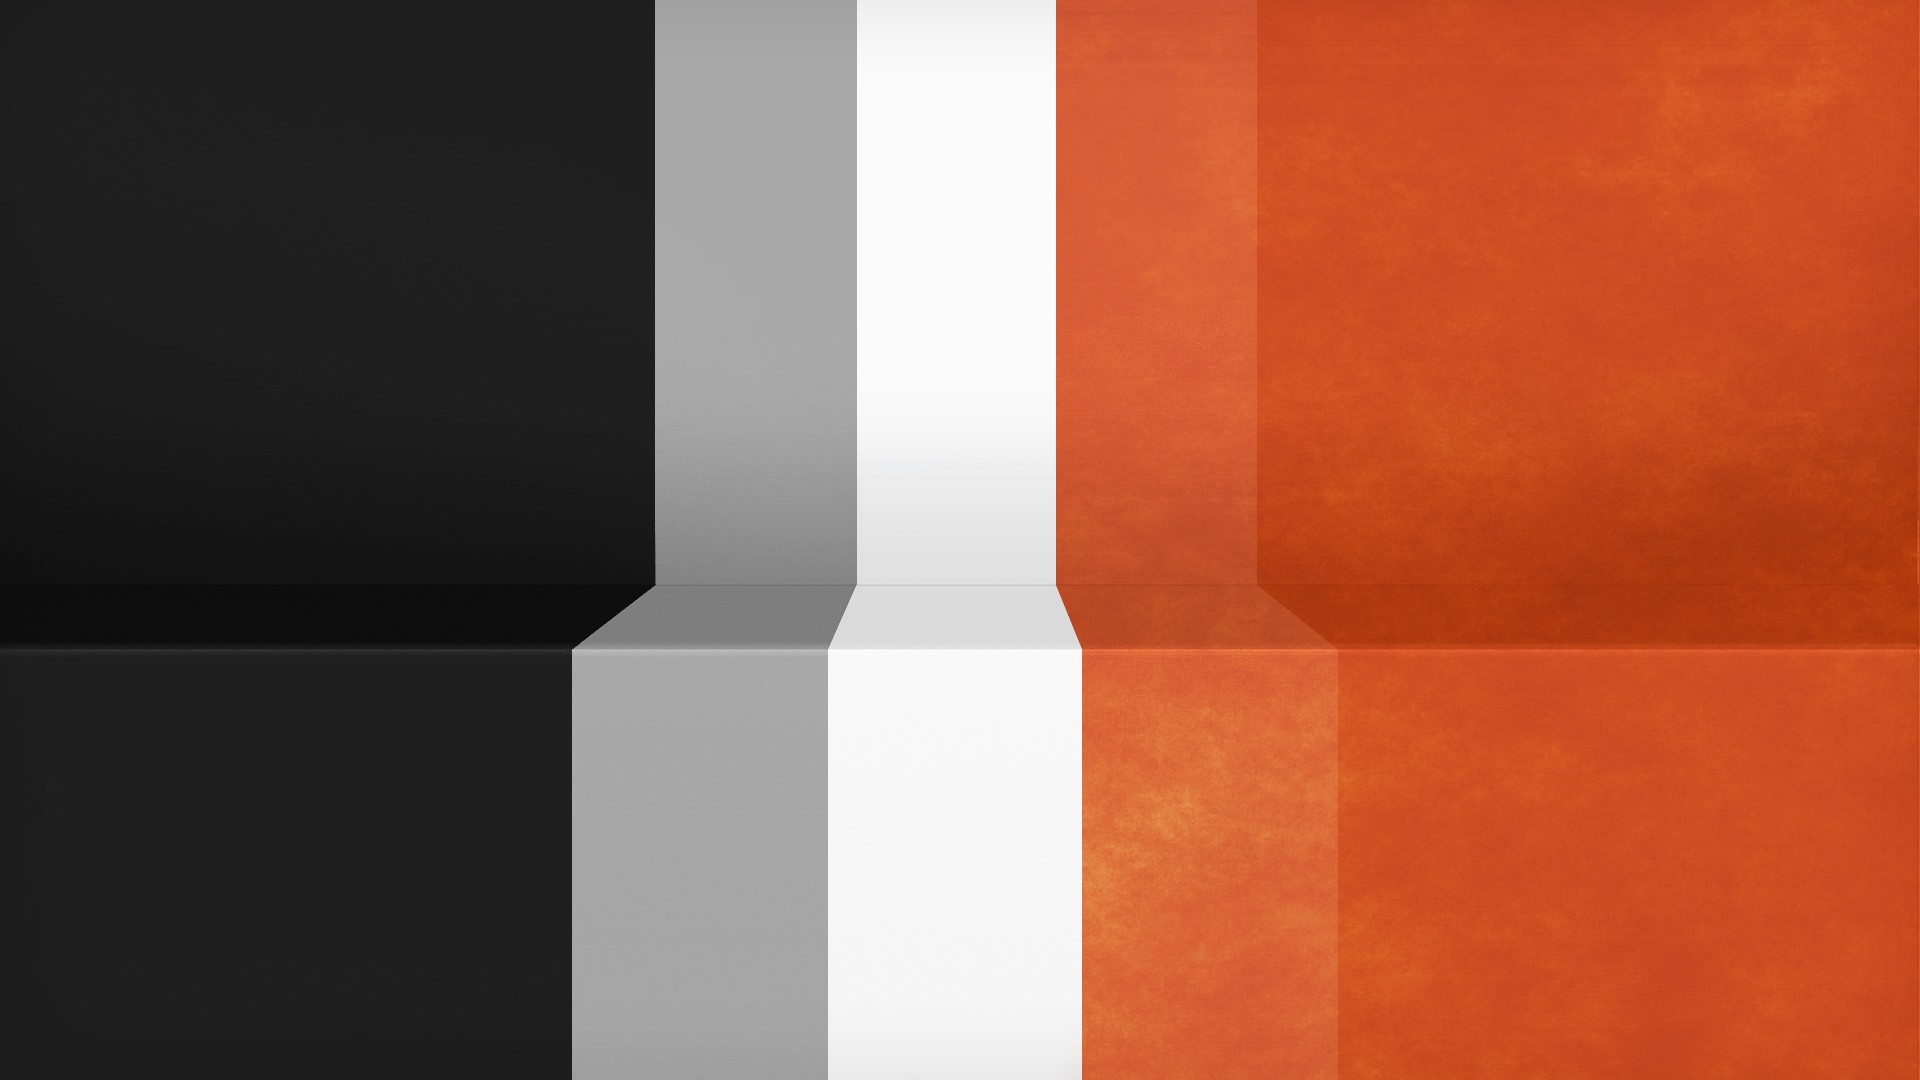 abstract, Black, Minimalistic, White, Orange, Gray, Textures, Lines, Racing, Lack, Simple, Stripes, Shading Wallpaper